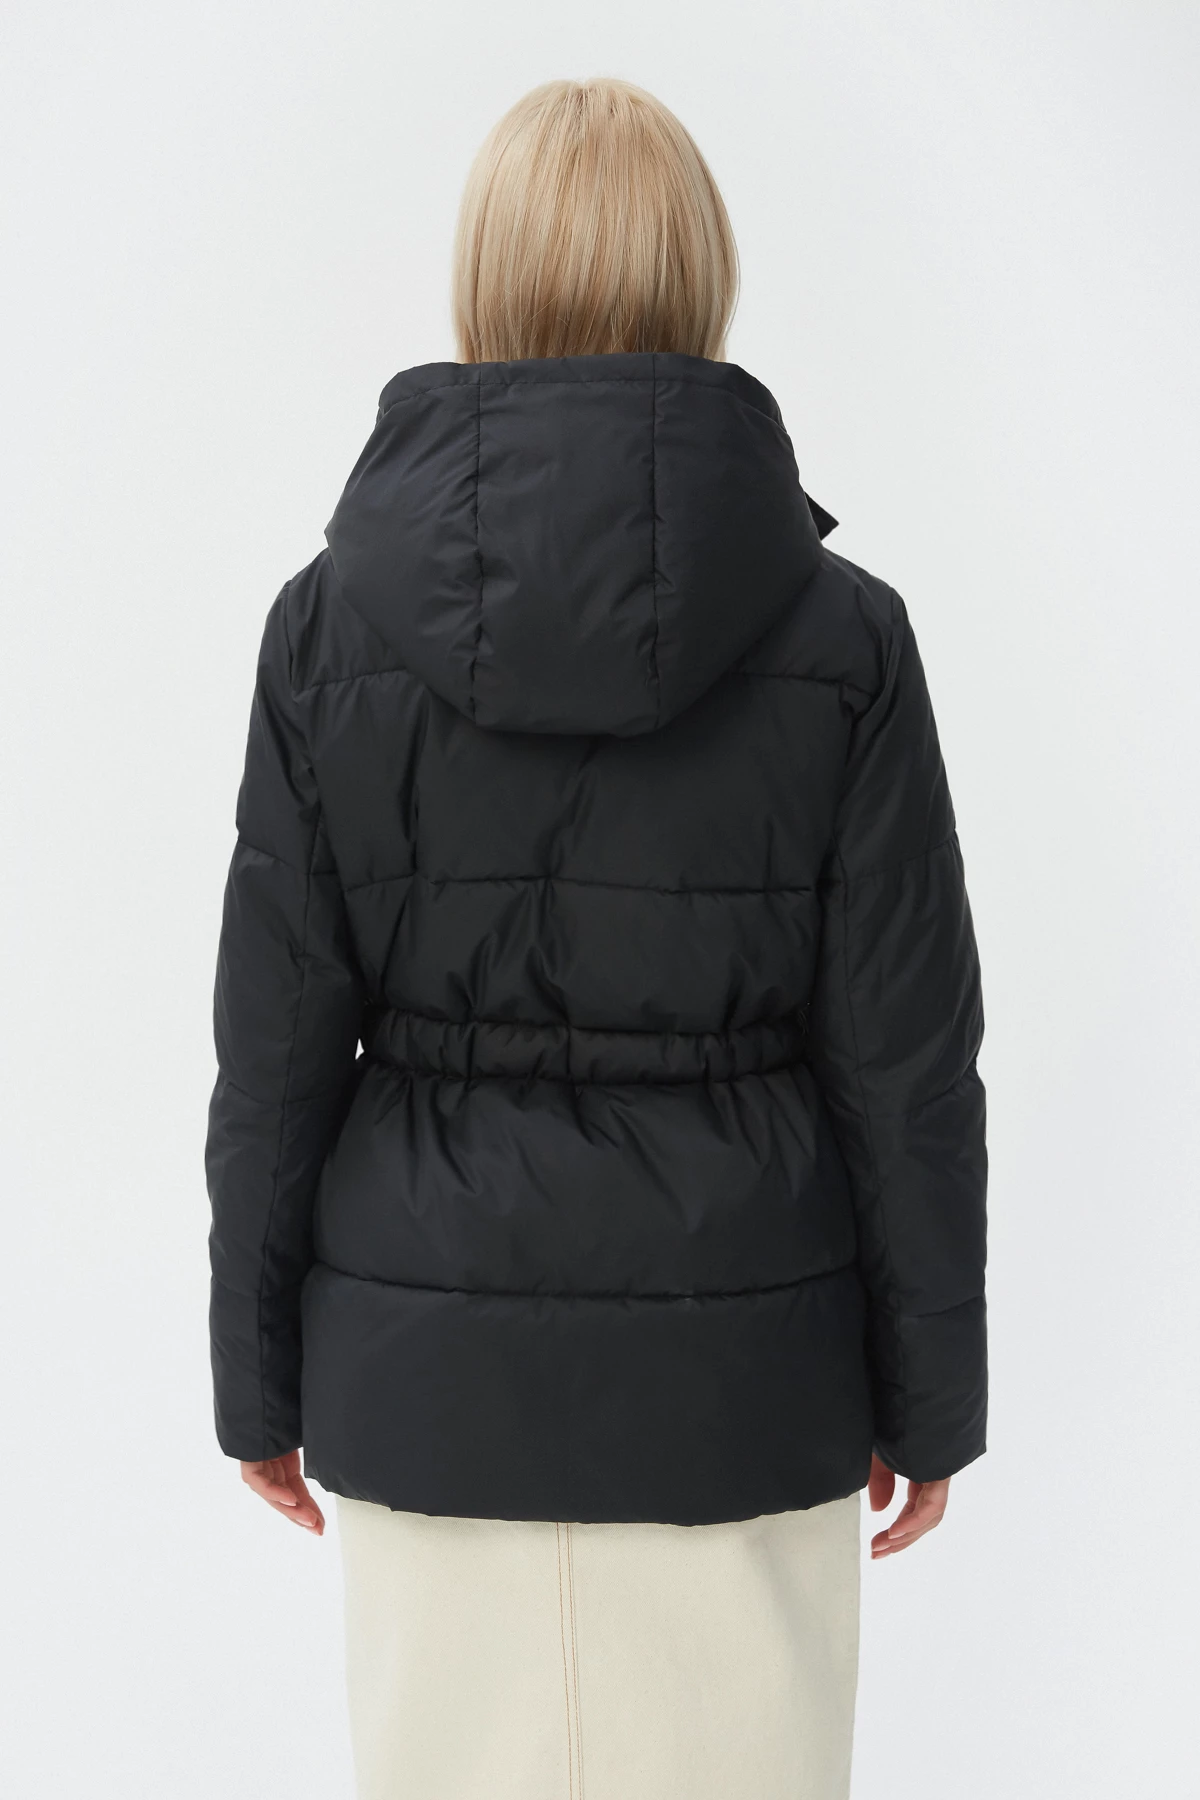 Black jacket with accent waist and insulation, photo 5